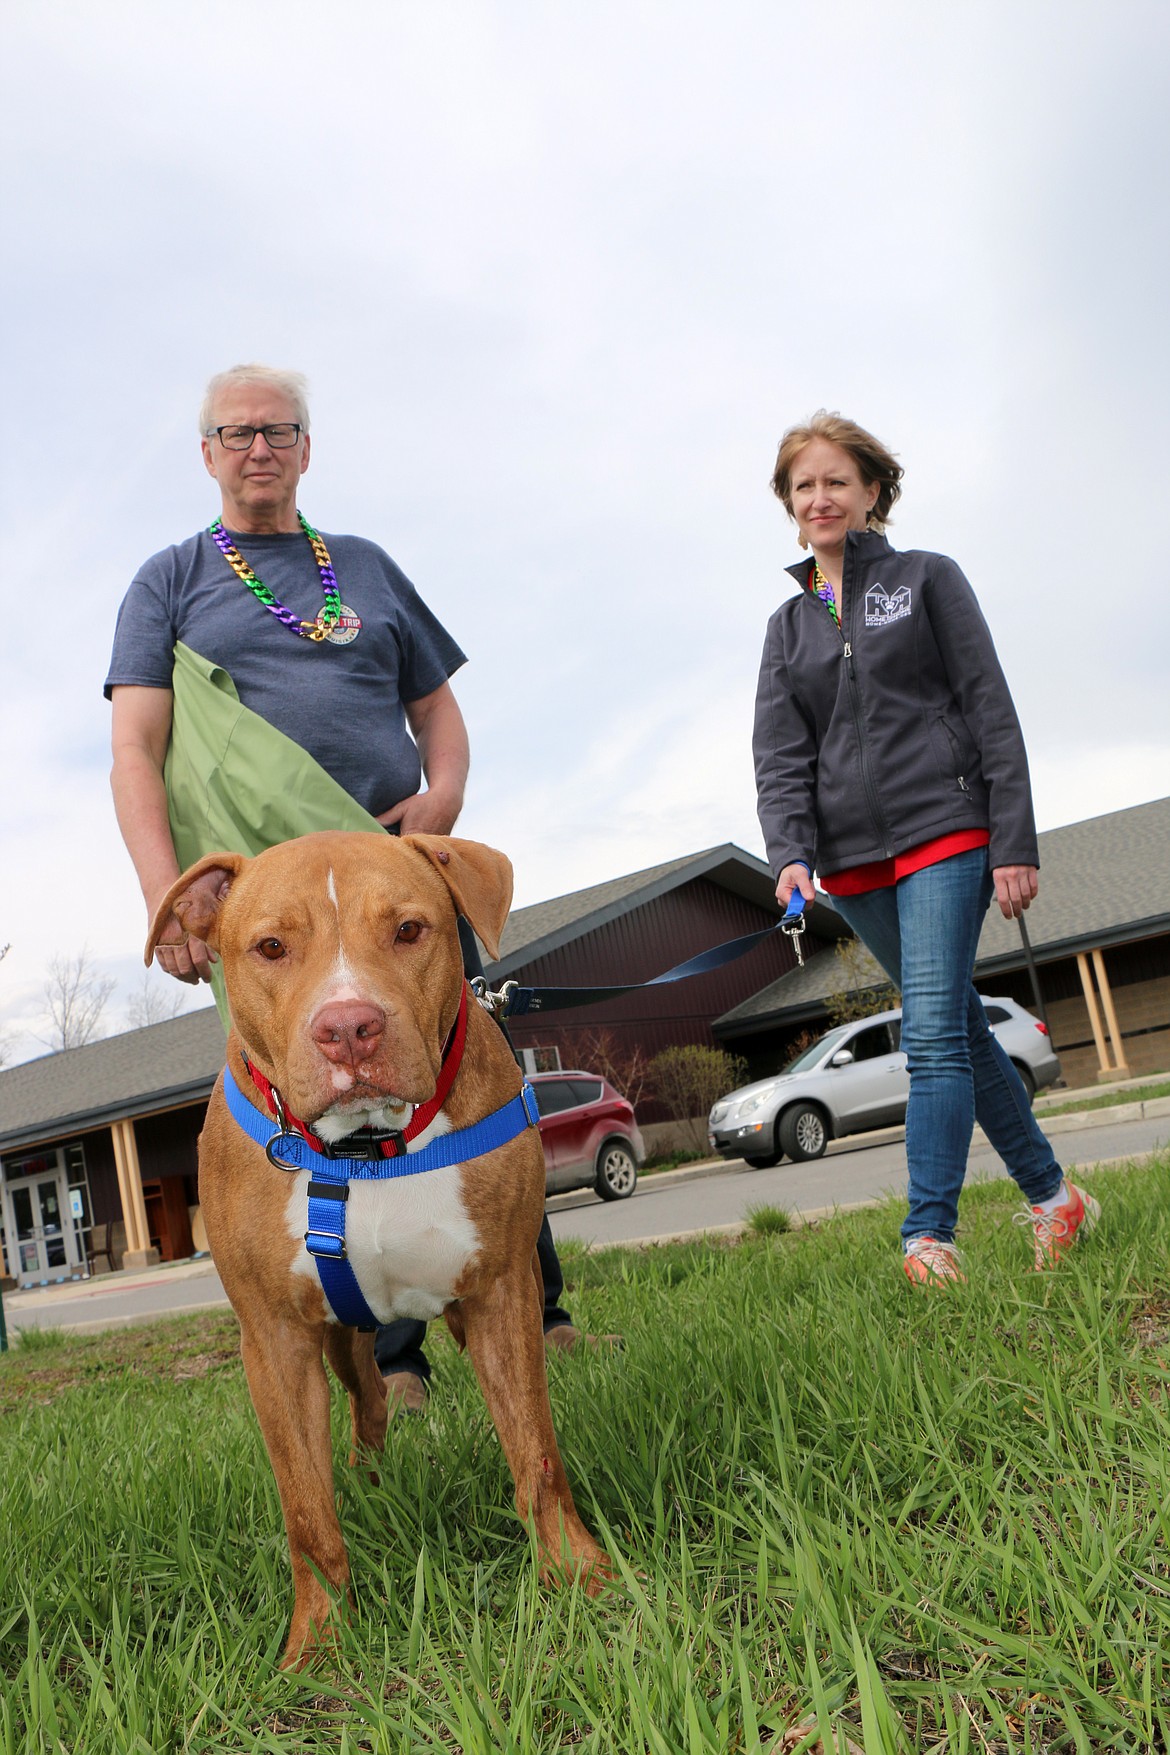 (Photo by CAROLINE LOBSINGER)Lazaruff enjoys a moment with veterinarian Dr. Marty Becker and Mandy Evans, executive director of the Panhandle Animal Shelter. after making it home to Sandpoint after a nine-month recovery following his discovery in an abandoned home in Louisiana.